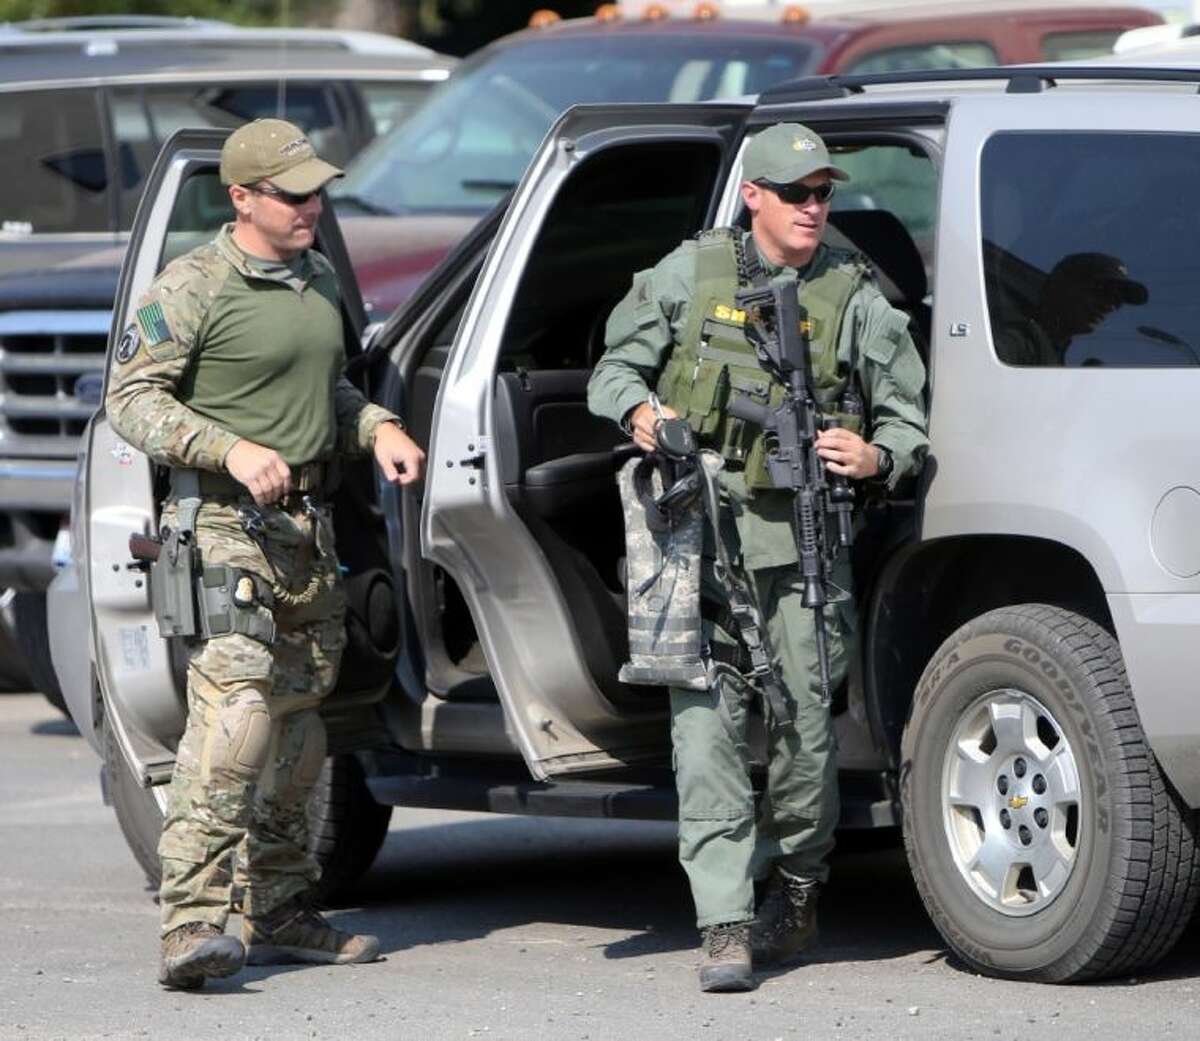 Law enforcement personnel head into the Valley County Emergency Operations Center during a search for James DiMaggio Saturday in Cascade, Idaho. About 150 federal agents converged on Idaho’s Frank Church River of No Return Wilderness in the search for 16-year-old Hannah Anderson and her suspected abductor. Anderson was found safe Saturday and her alleged abductor was killed.